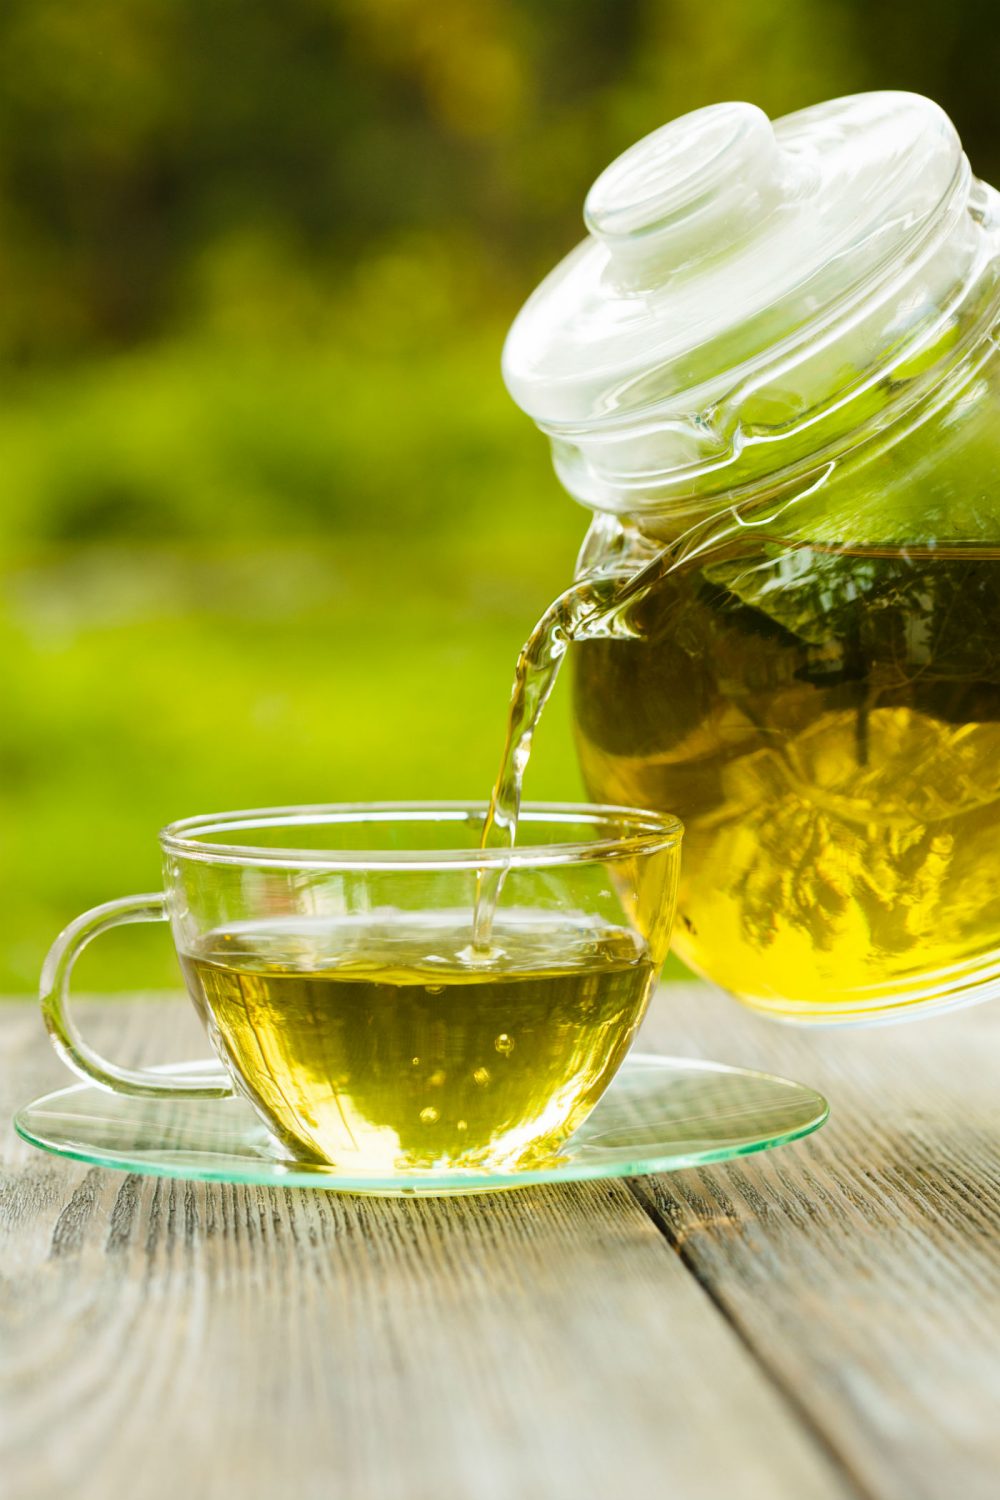 The Healing Power and Energetics of Herbs and Herbal Teas